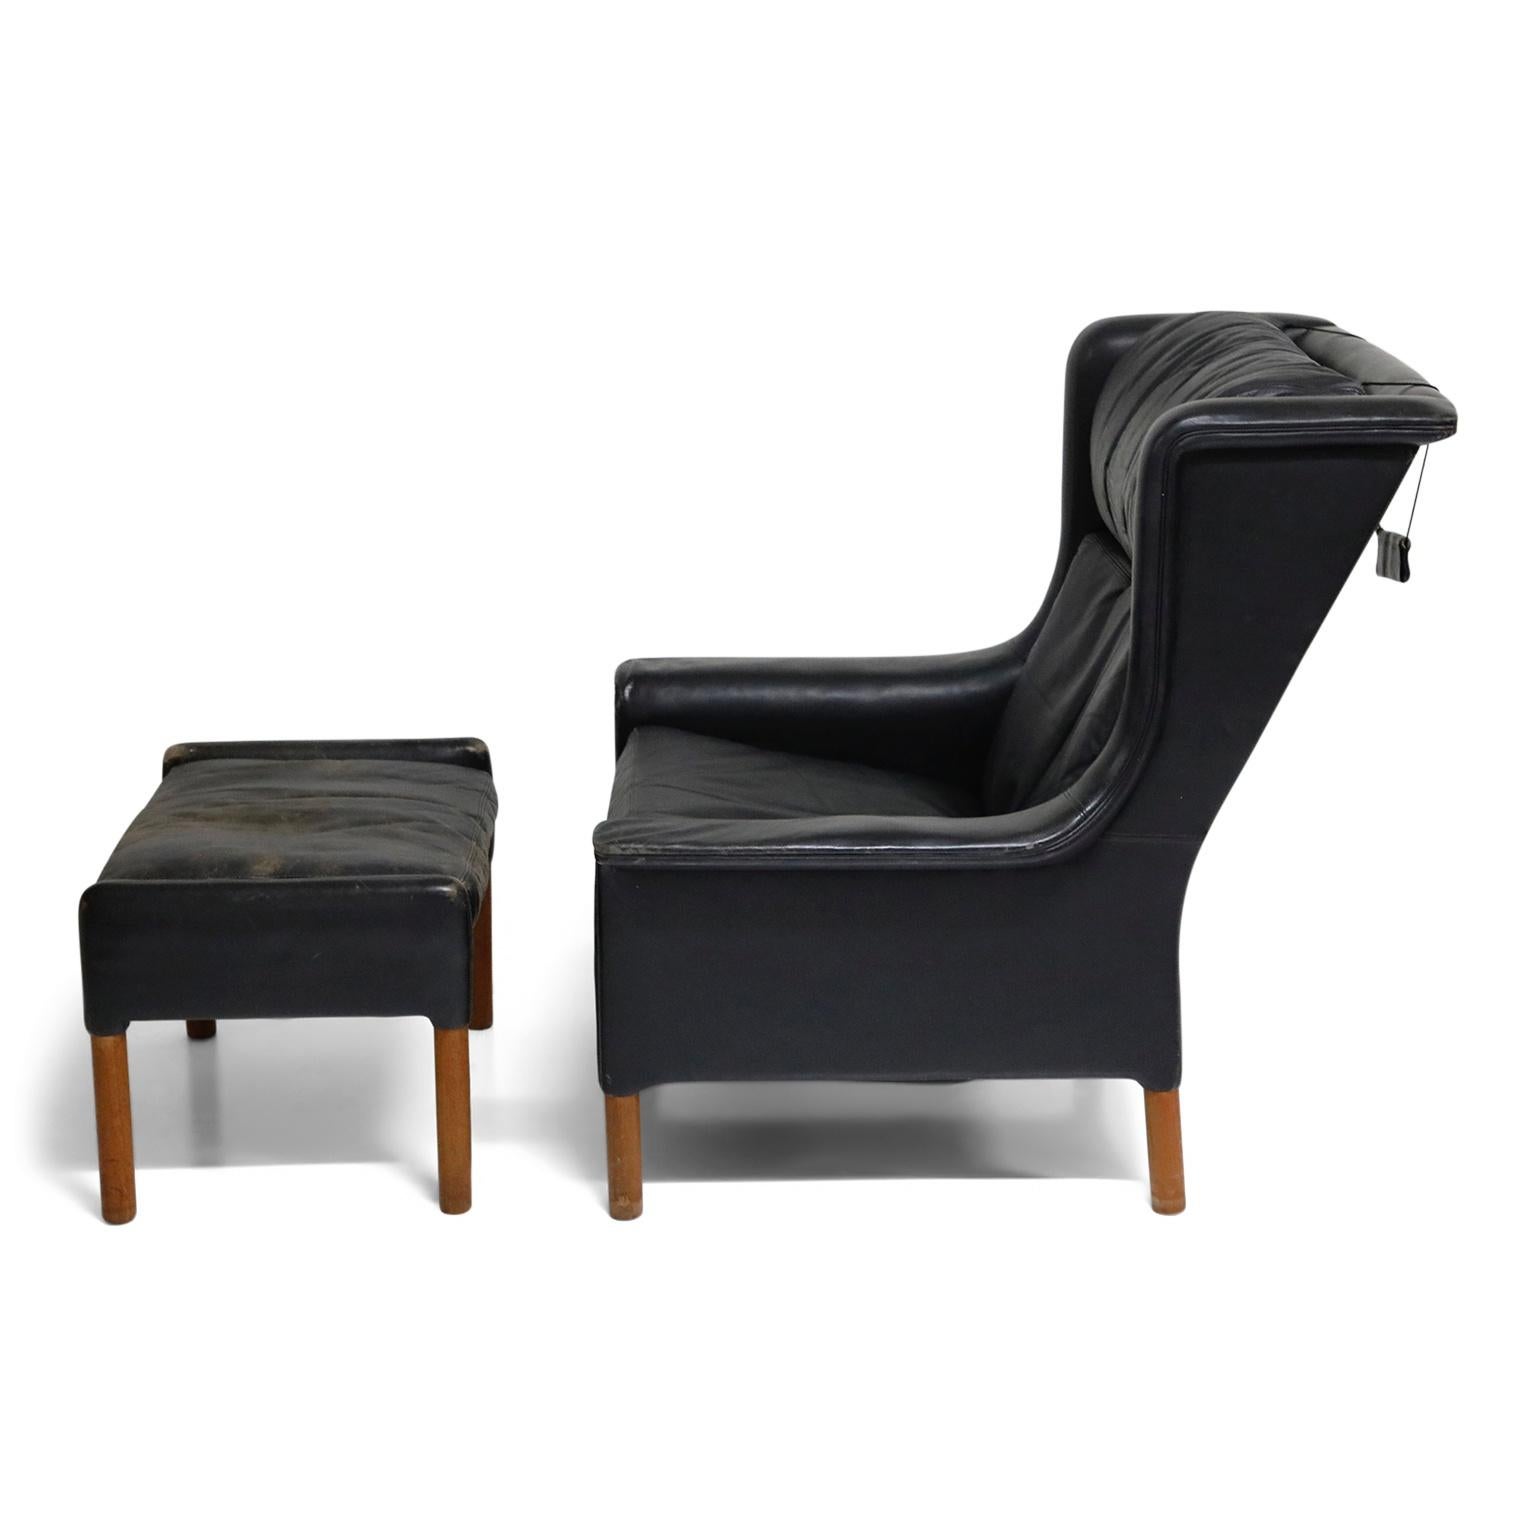 Mid-Century Modern Pair of Black Leather Wingback Chairs and Ottoman by Gerhard Berg, 1965